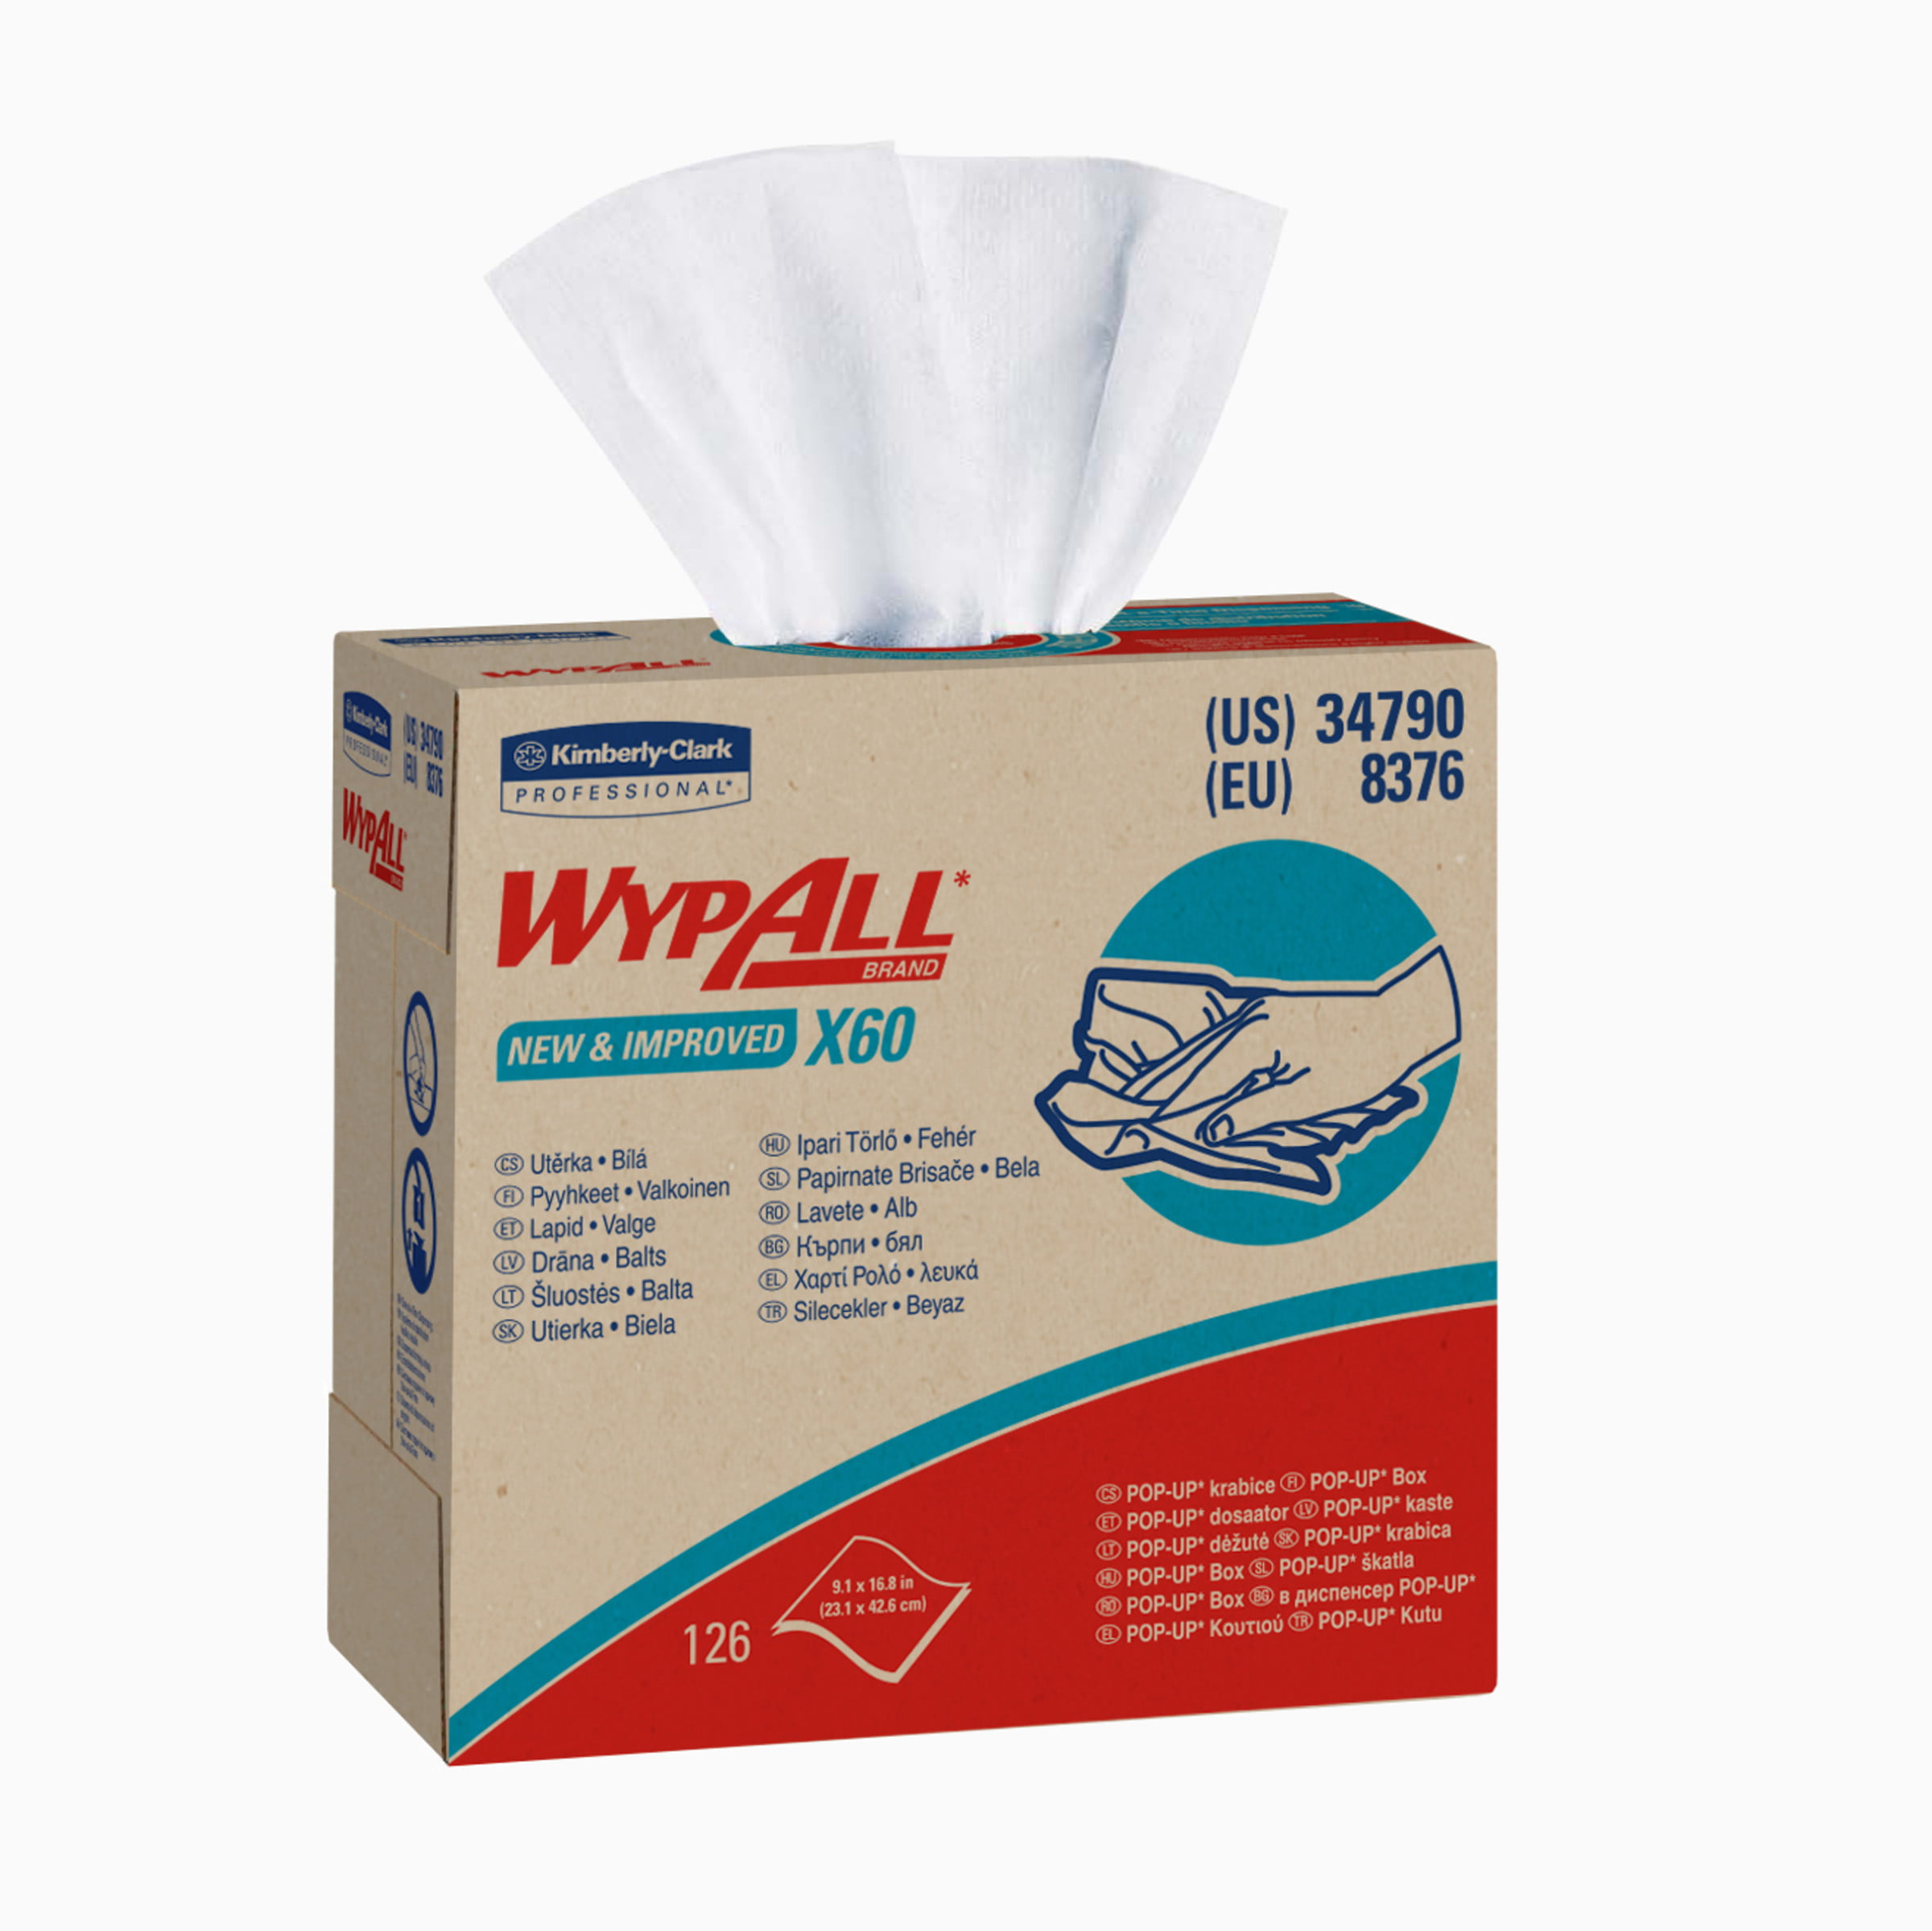 34790 126 Sheets-White Wypall X60 Reusable Cloths in Convenient Pop-Up Box, 